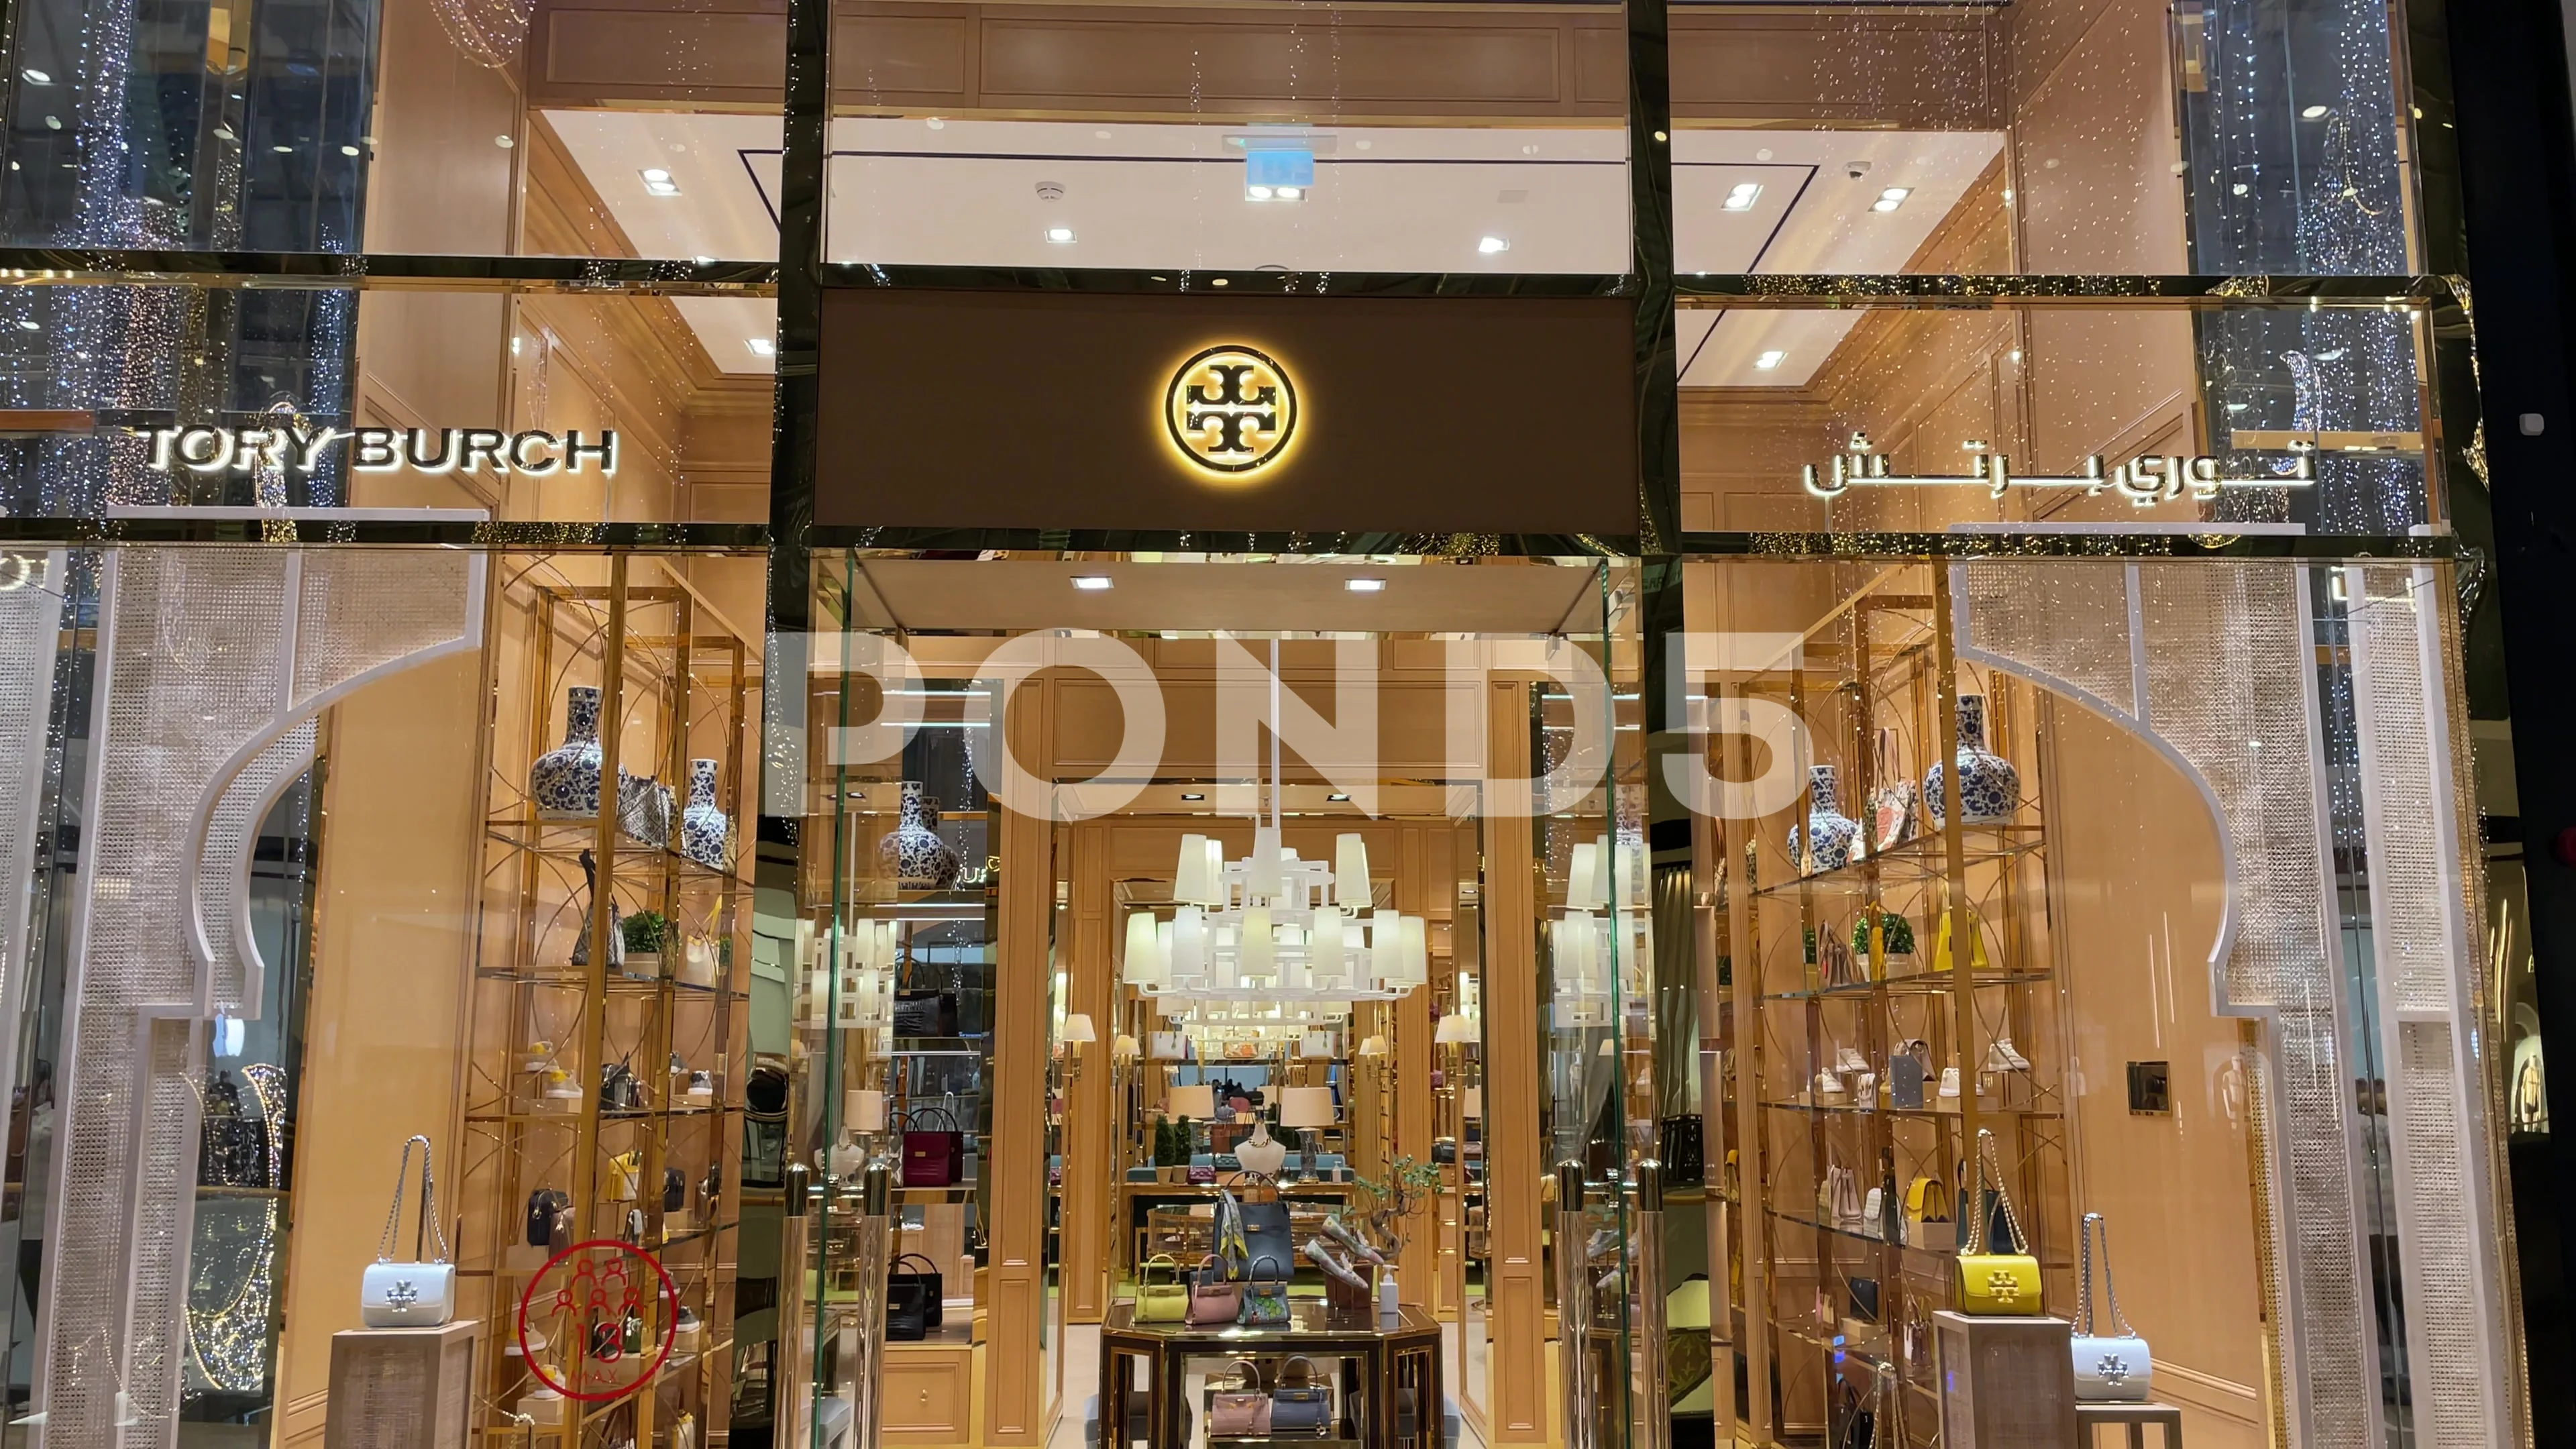 Tory Burch Stock Video Footage | Royalty Free Tory Burch Videos | Pond5